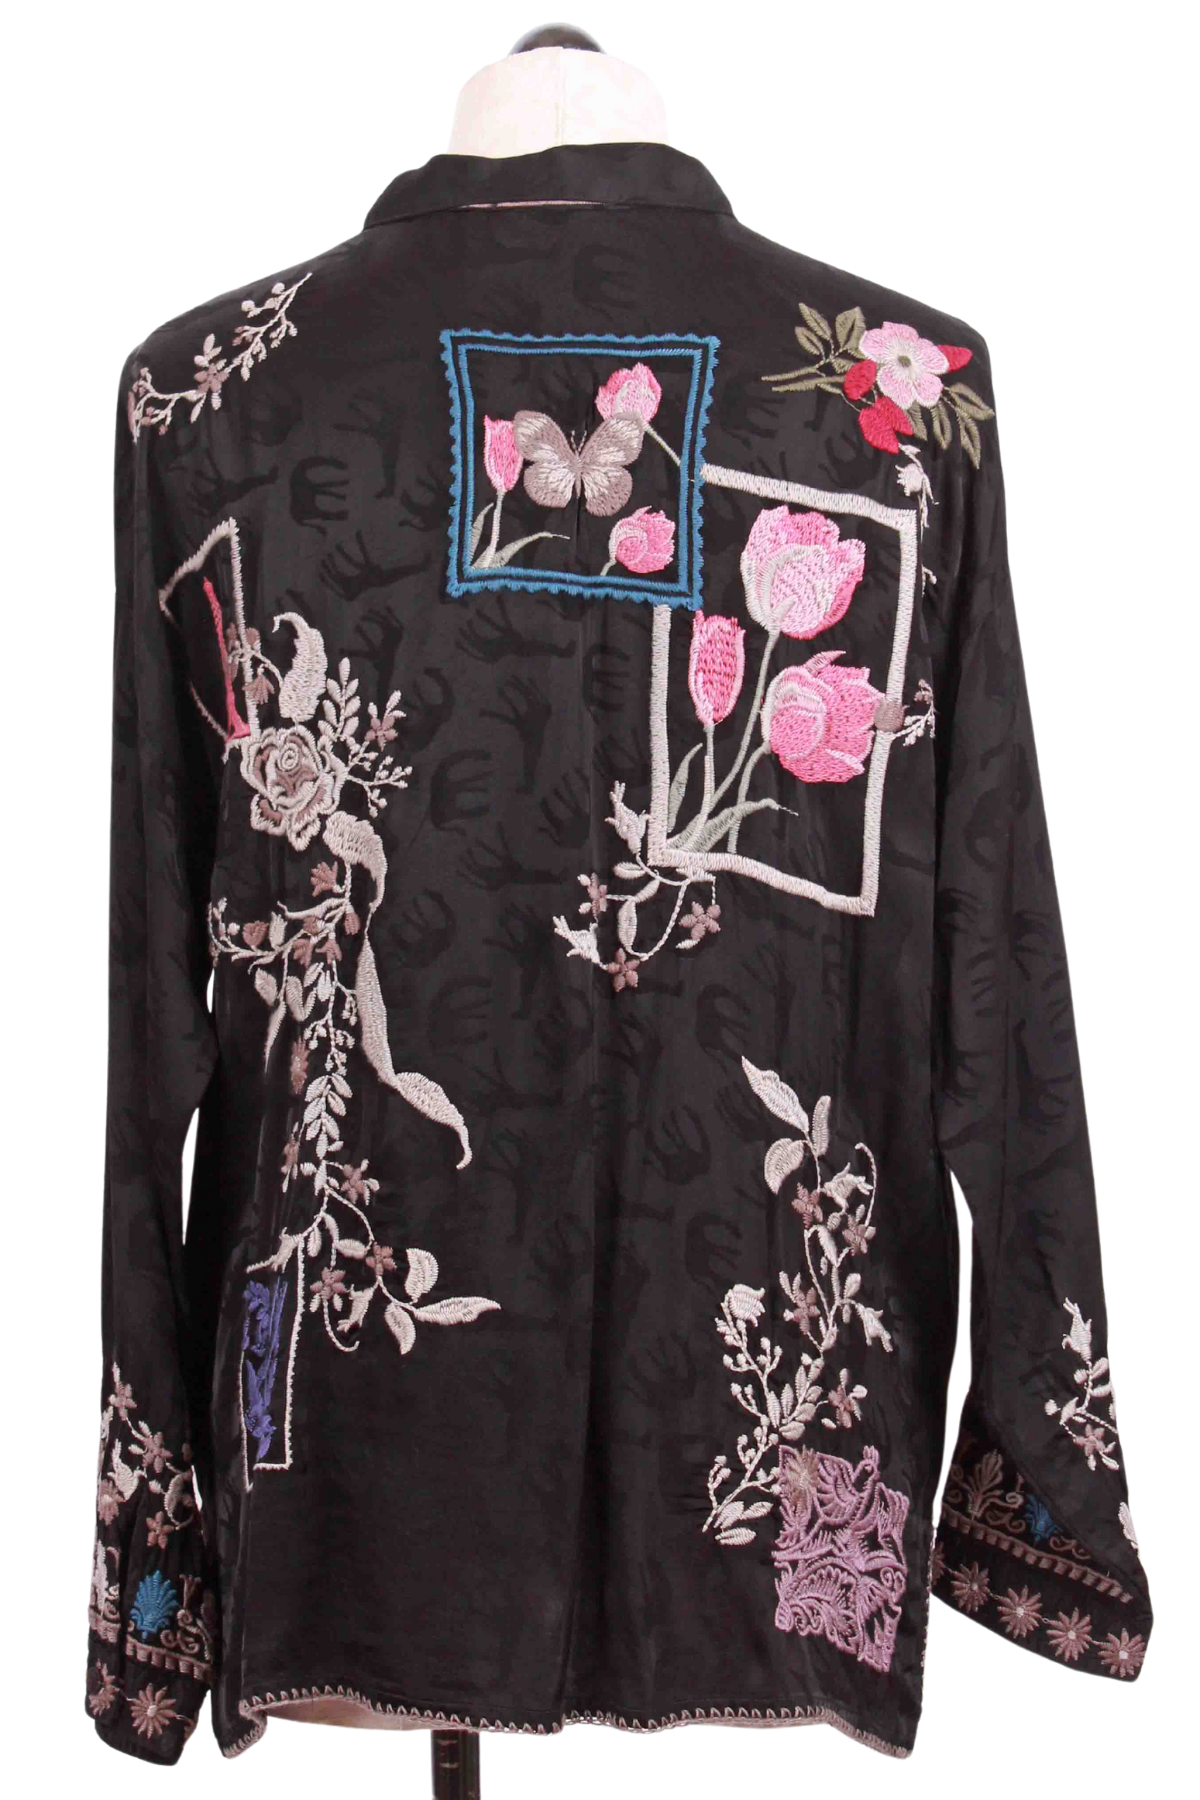 back view of black Embroidered Briony Blouse by Johnny Was